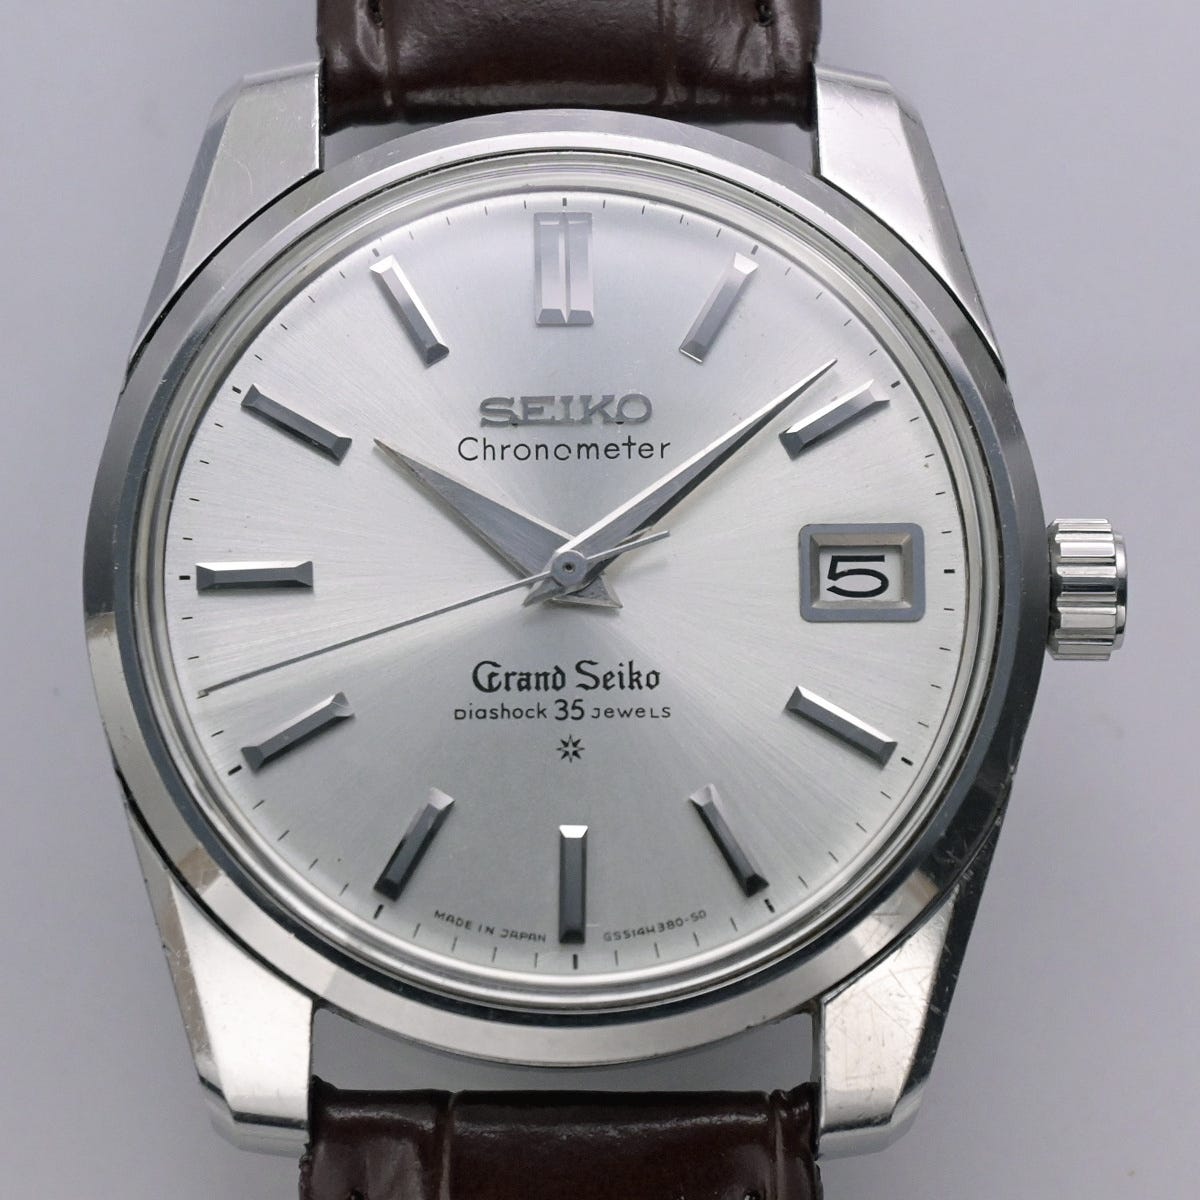 It's not a trap - the Grand Seiko guy